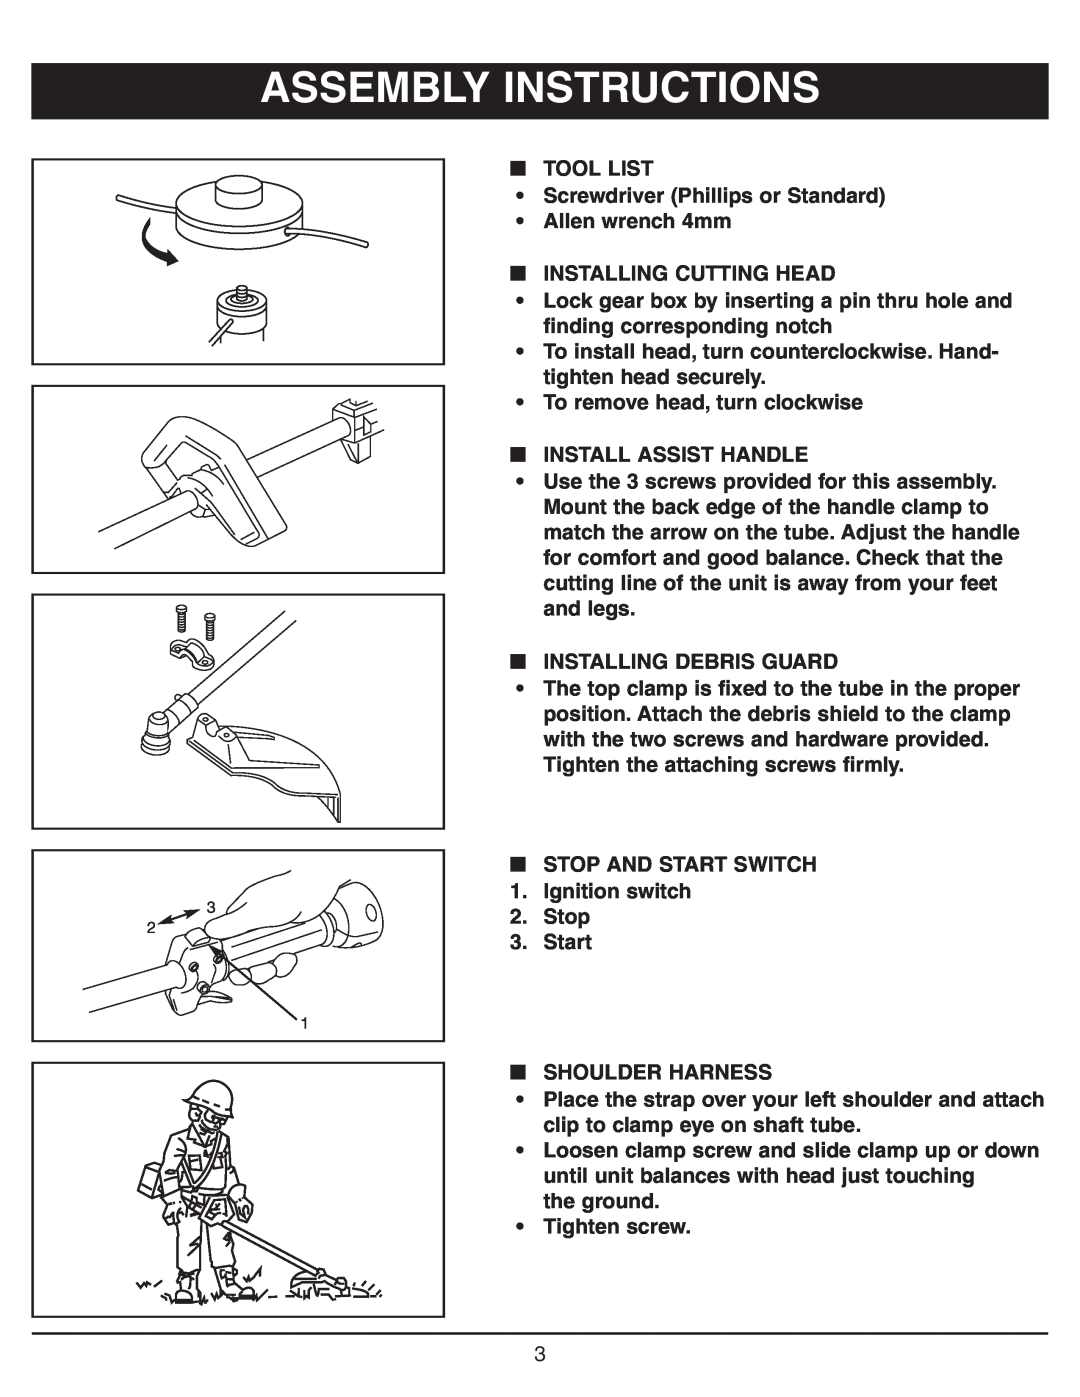 Sarlo SS-18 owner manual Assembly Instructions 